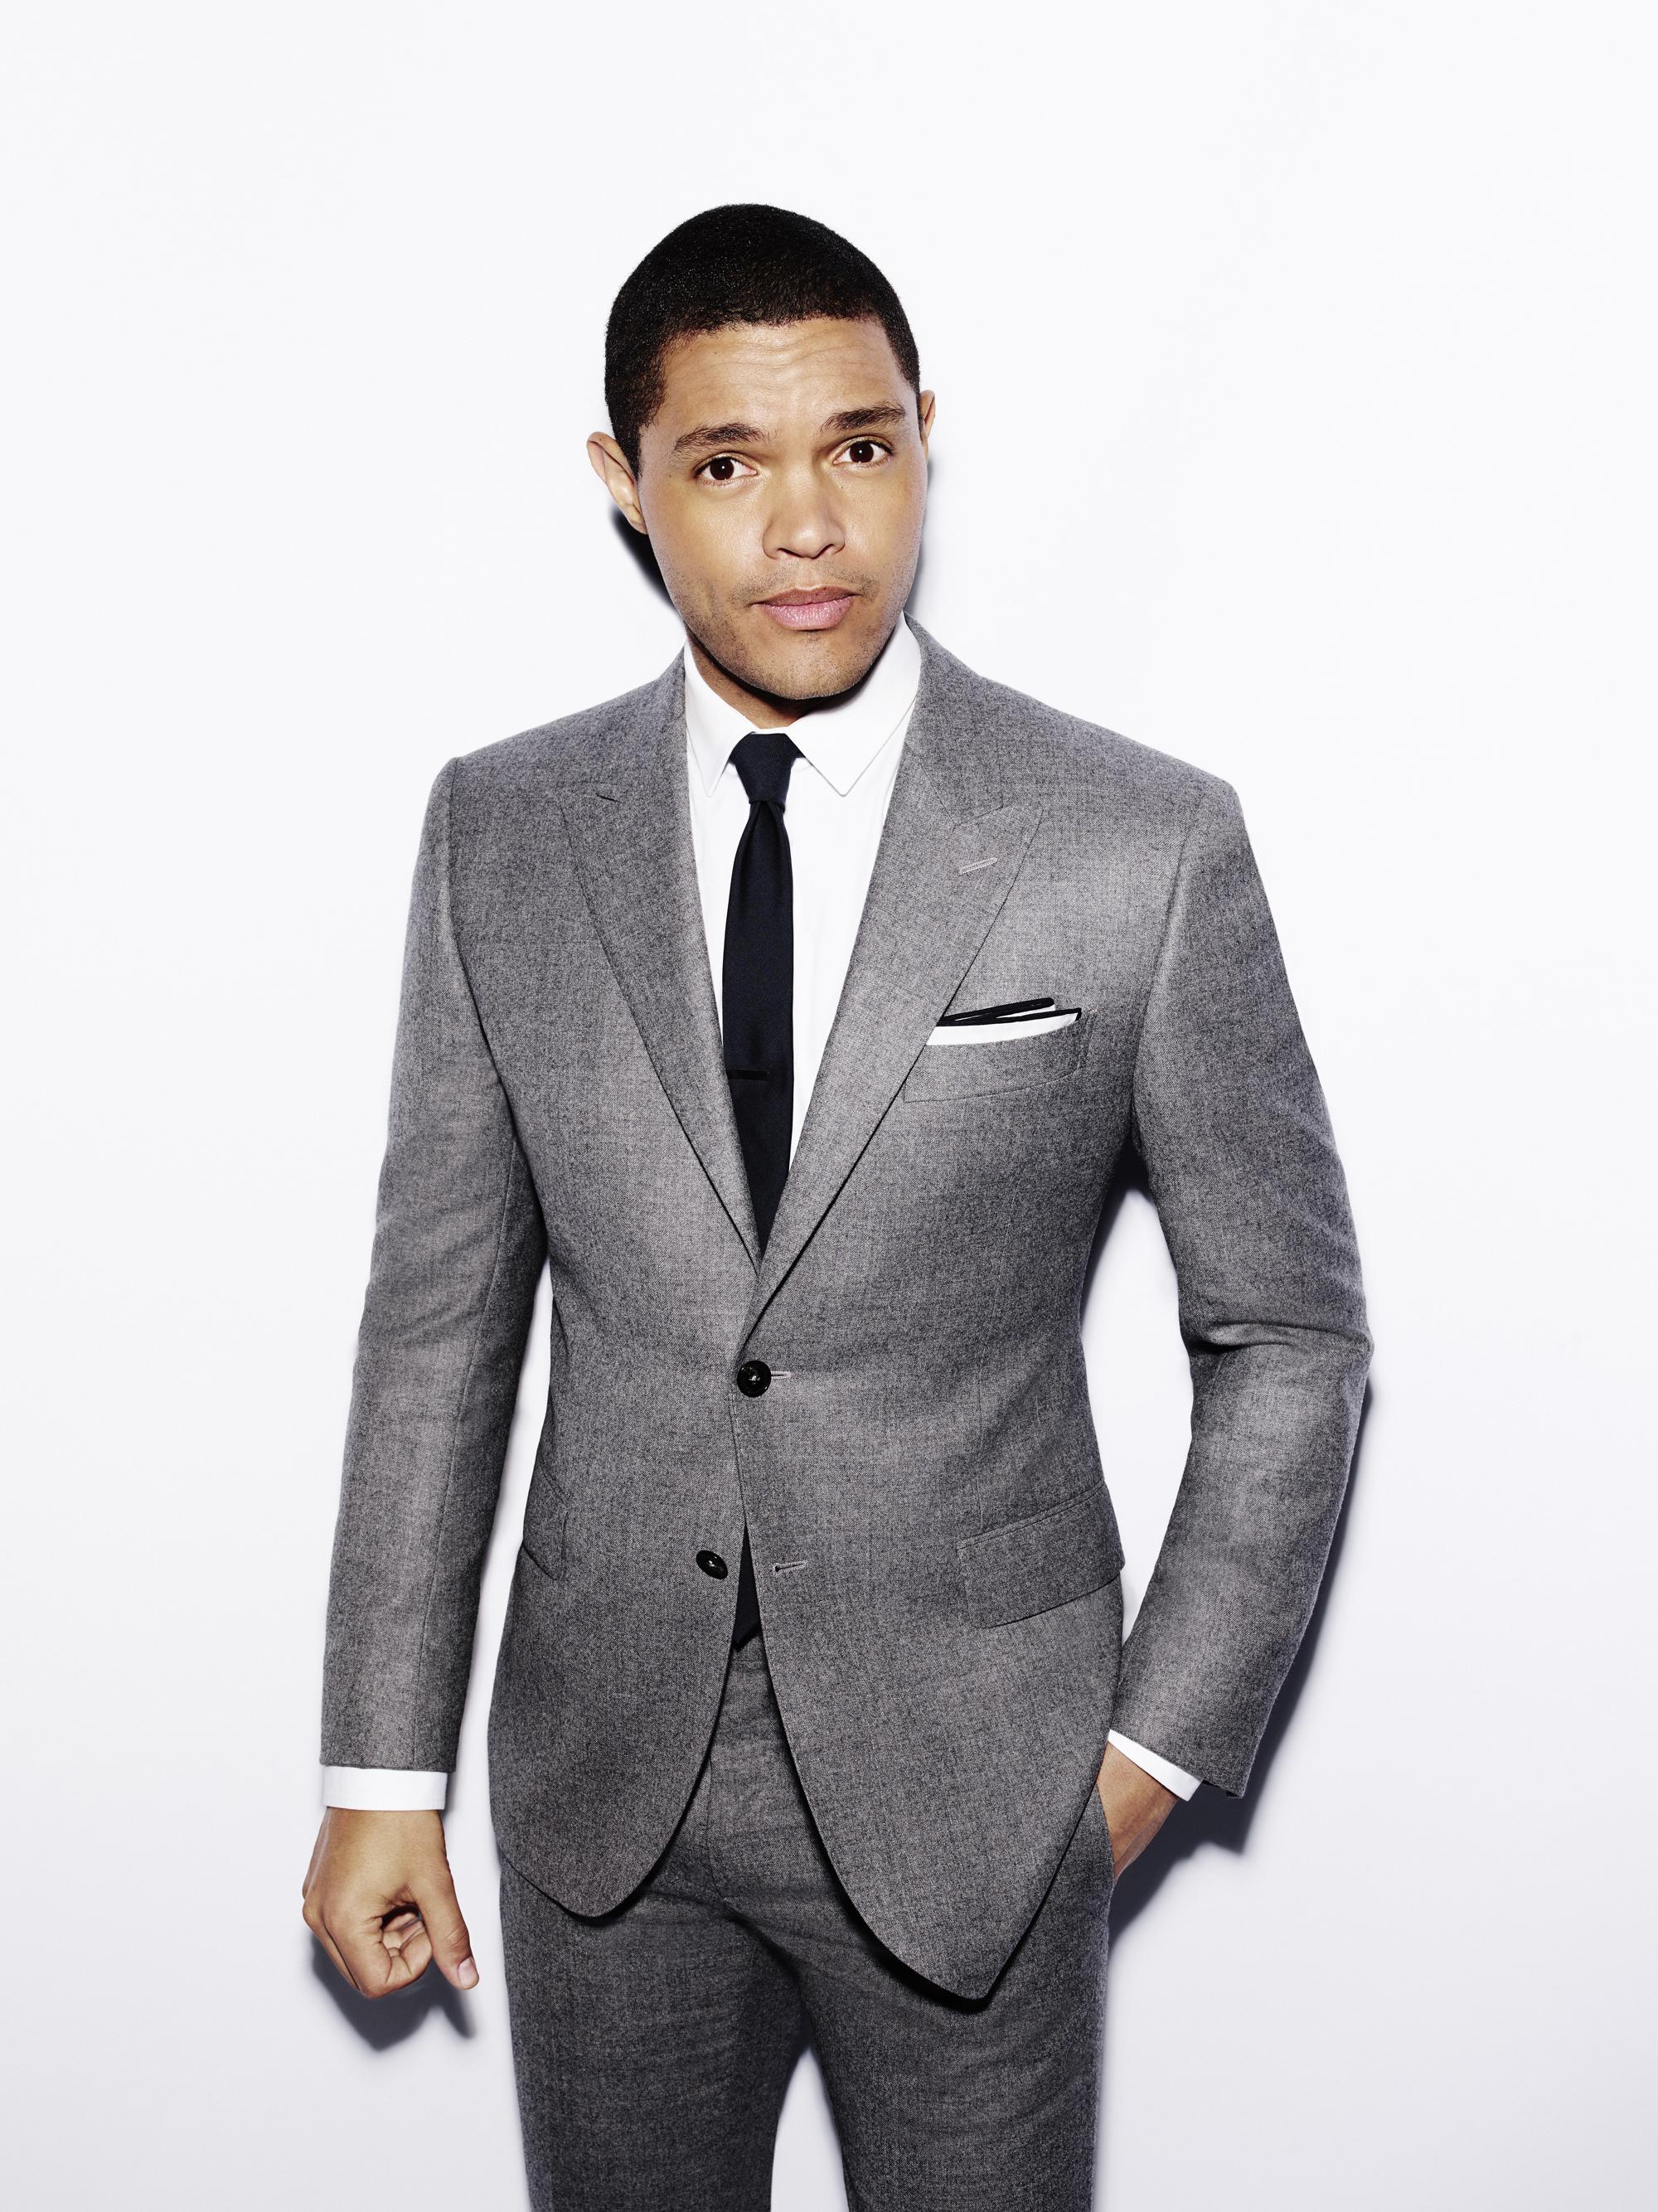 How To Stream 'The Daily Show With Trevor Noah, ' Since The Show Is